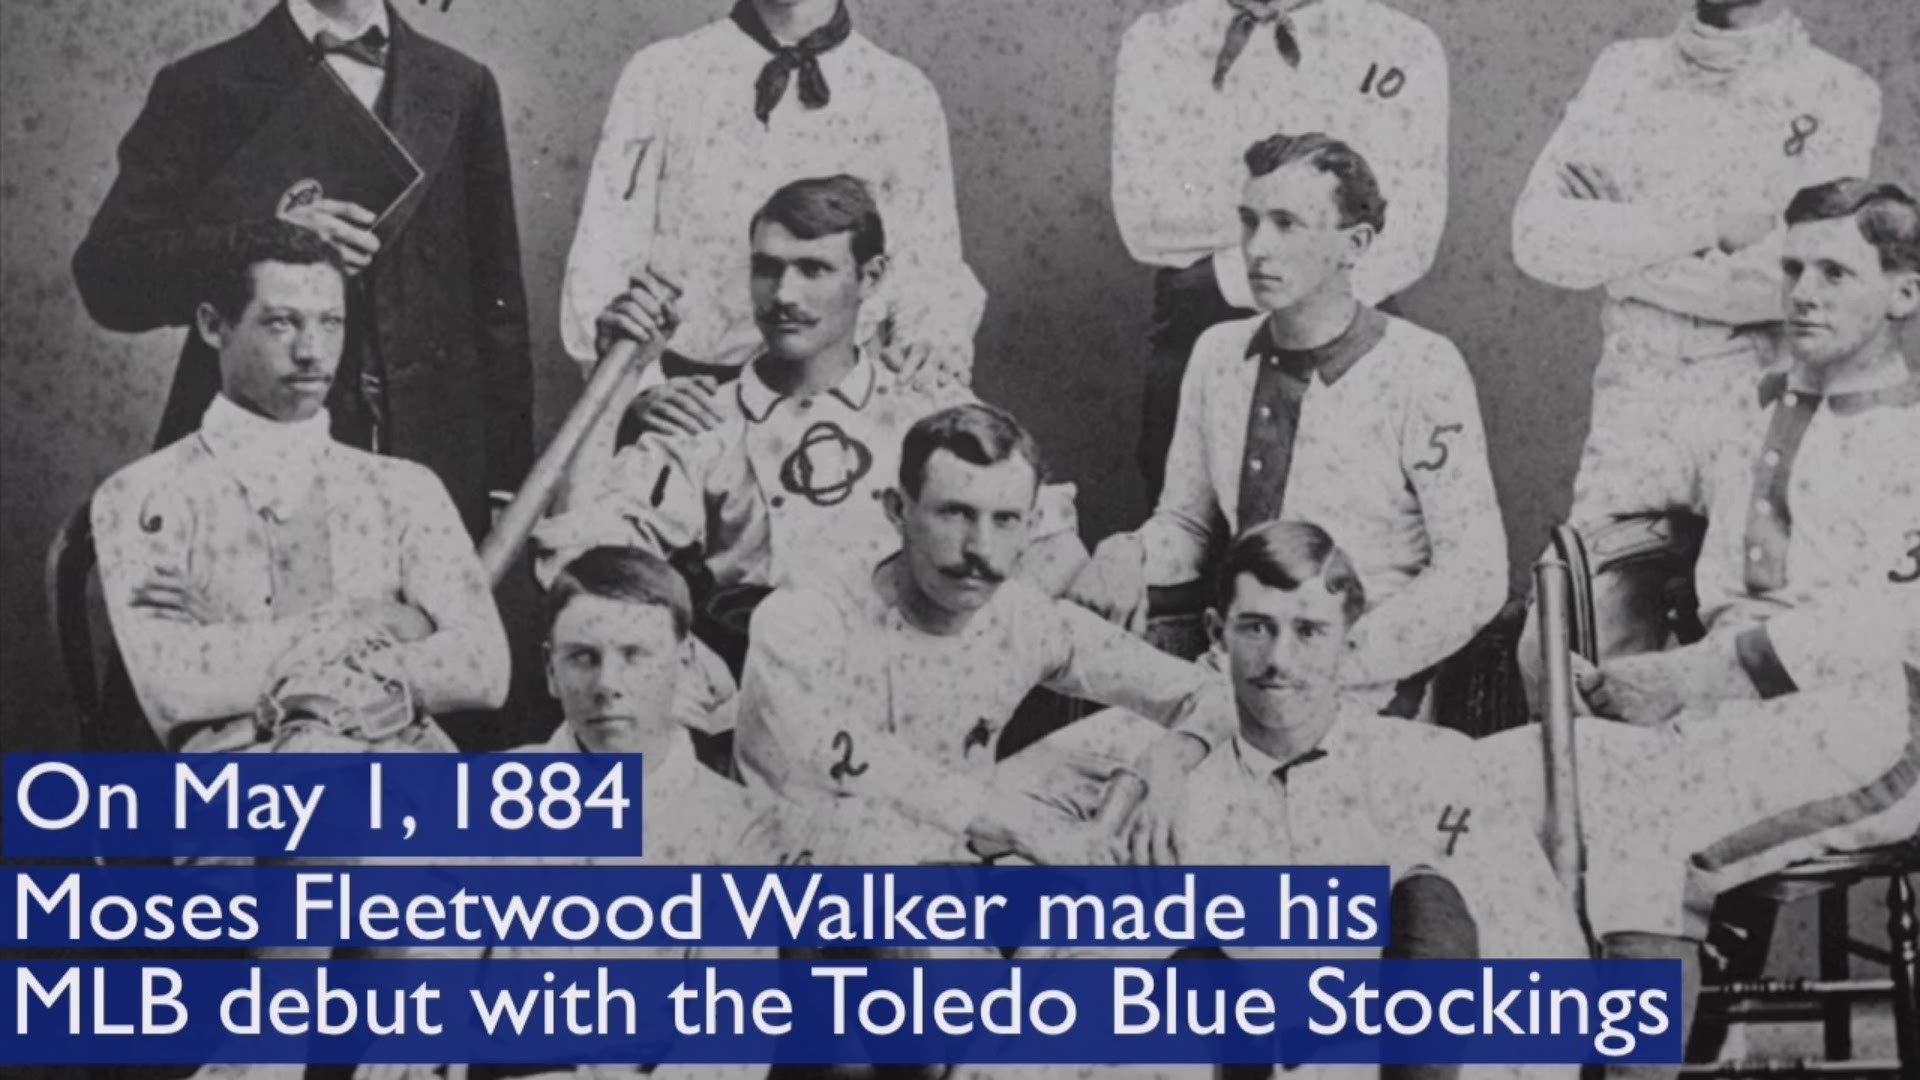 Moses Fleetwood Walker debuted in the majors in 1884